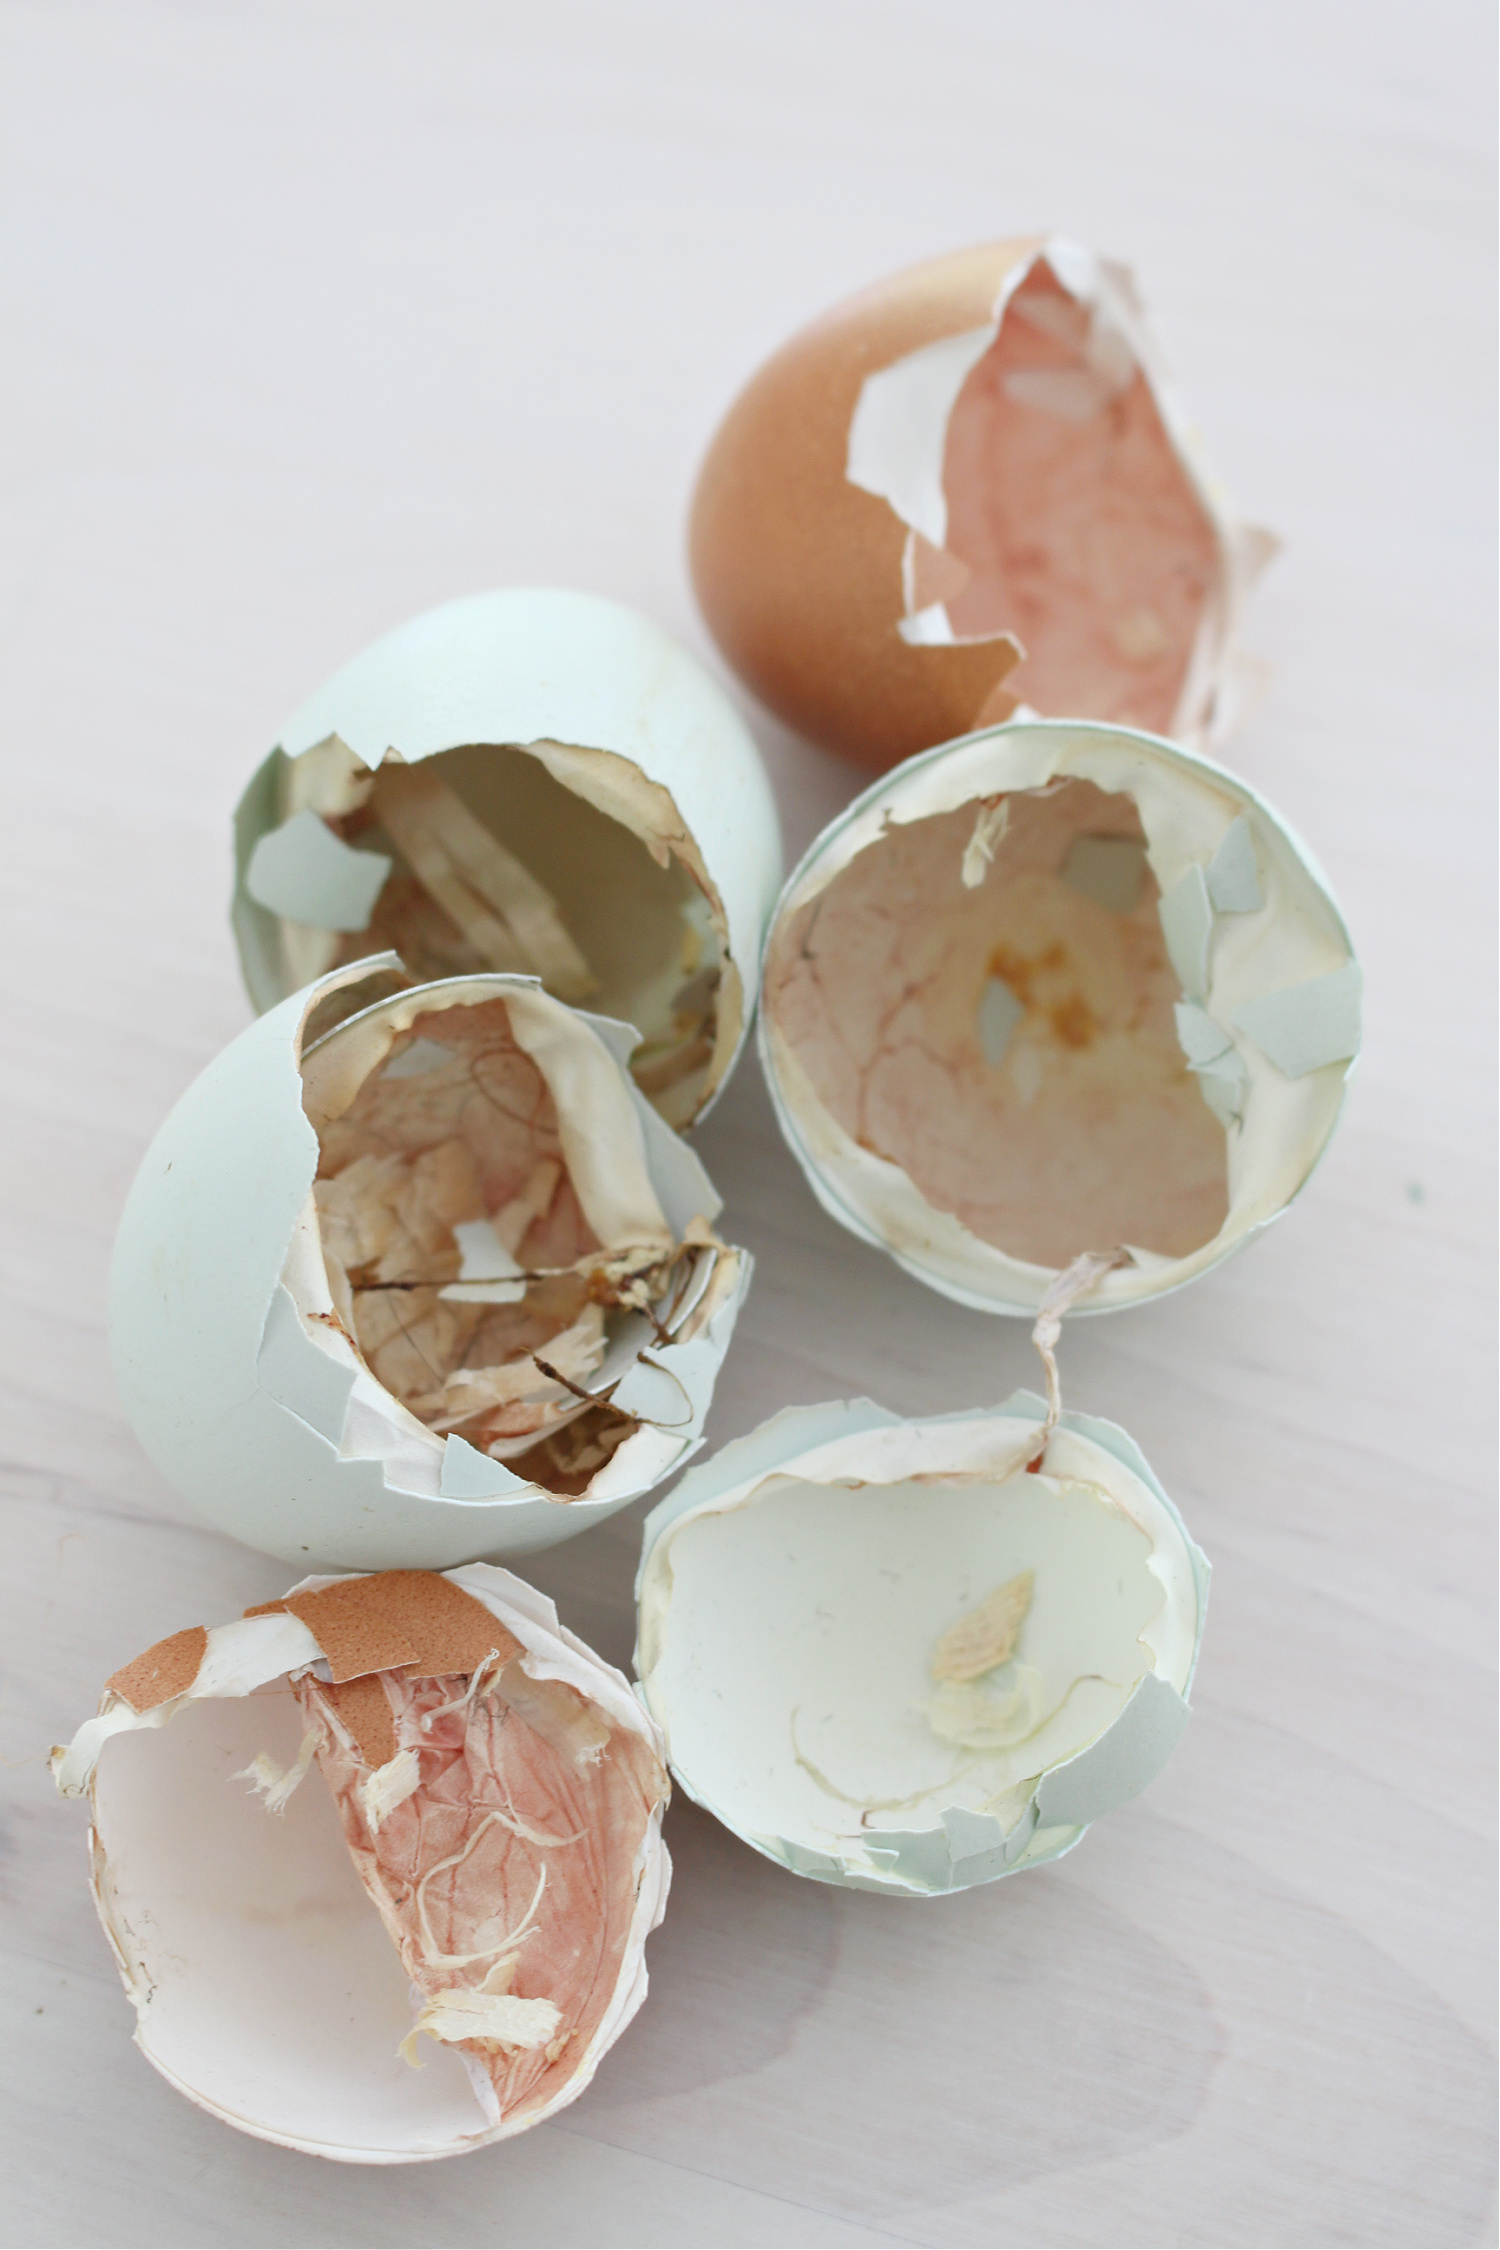 Empty Shells from Hatched Chicks